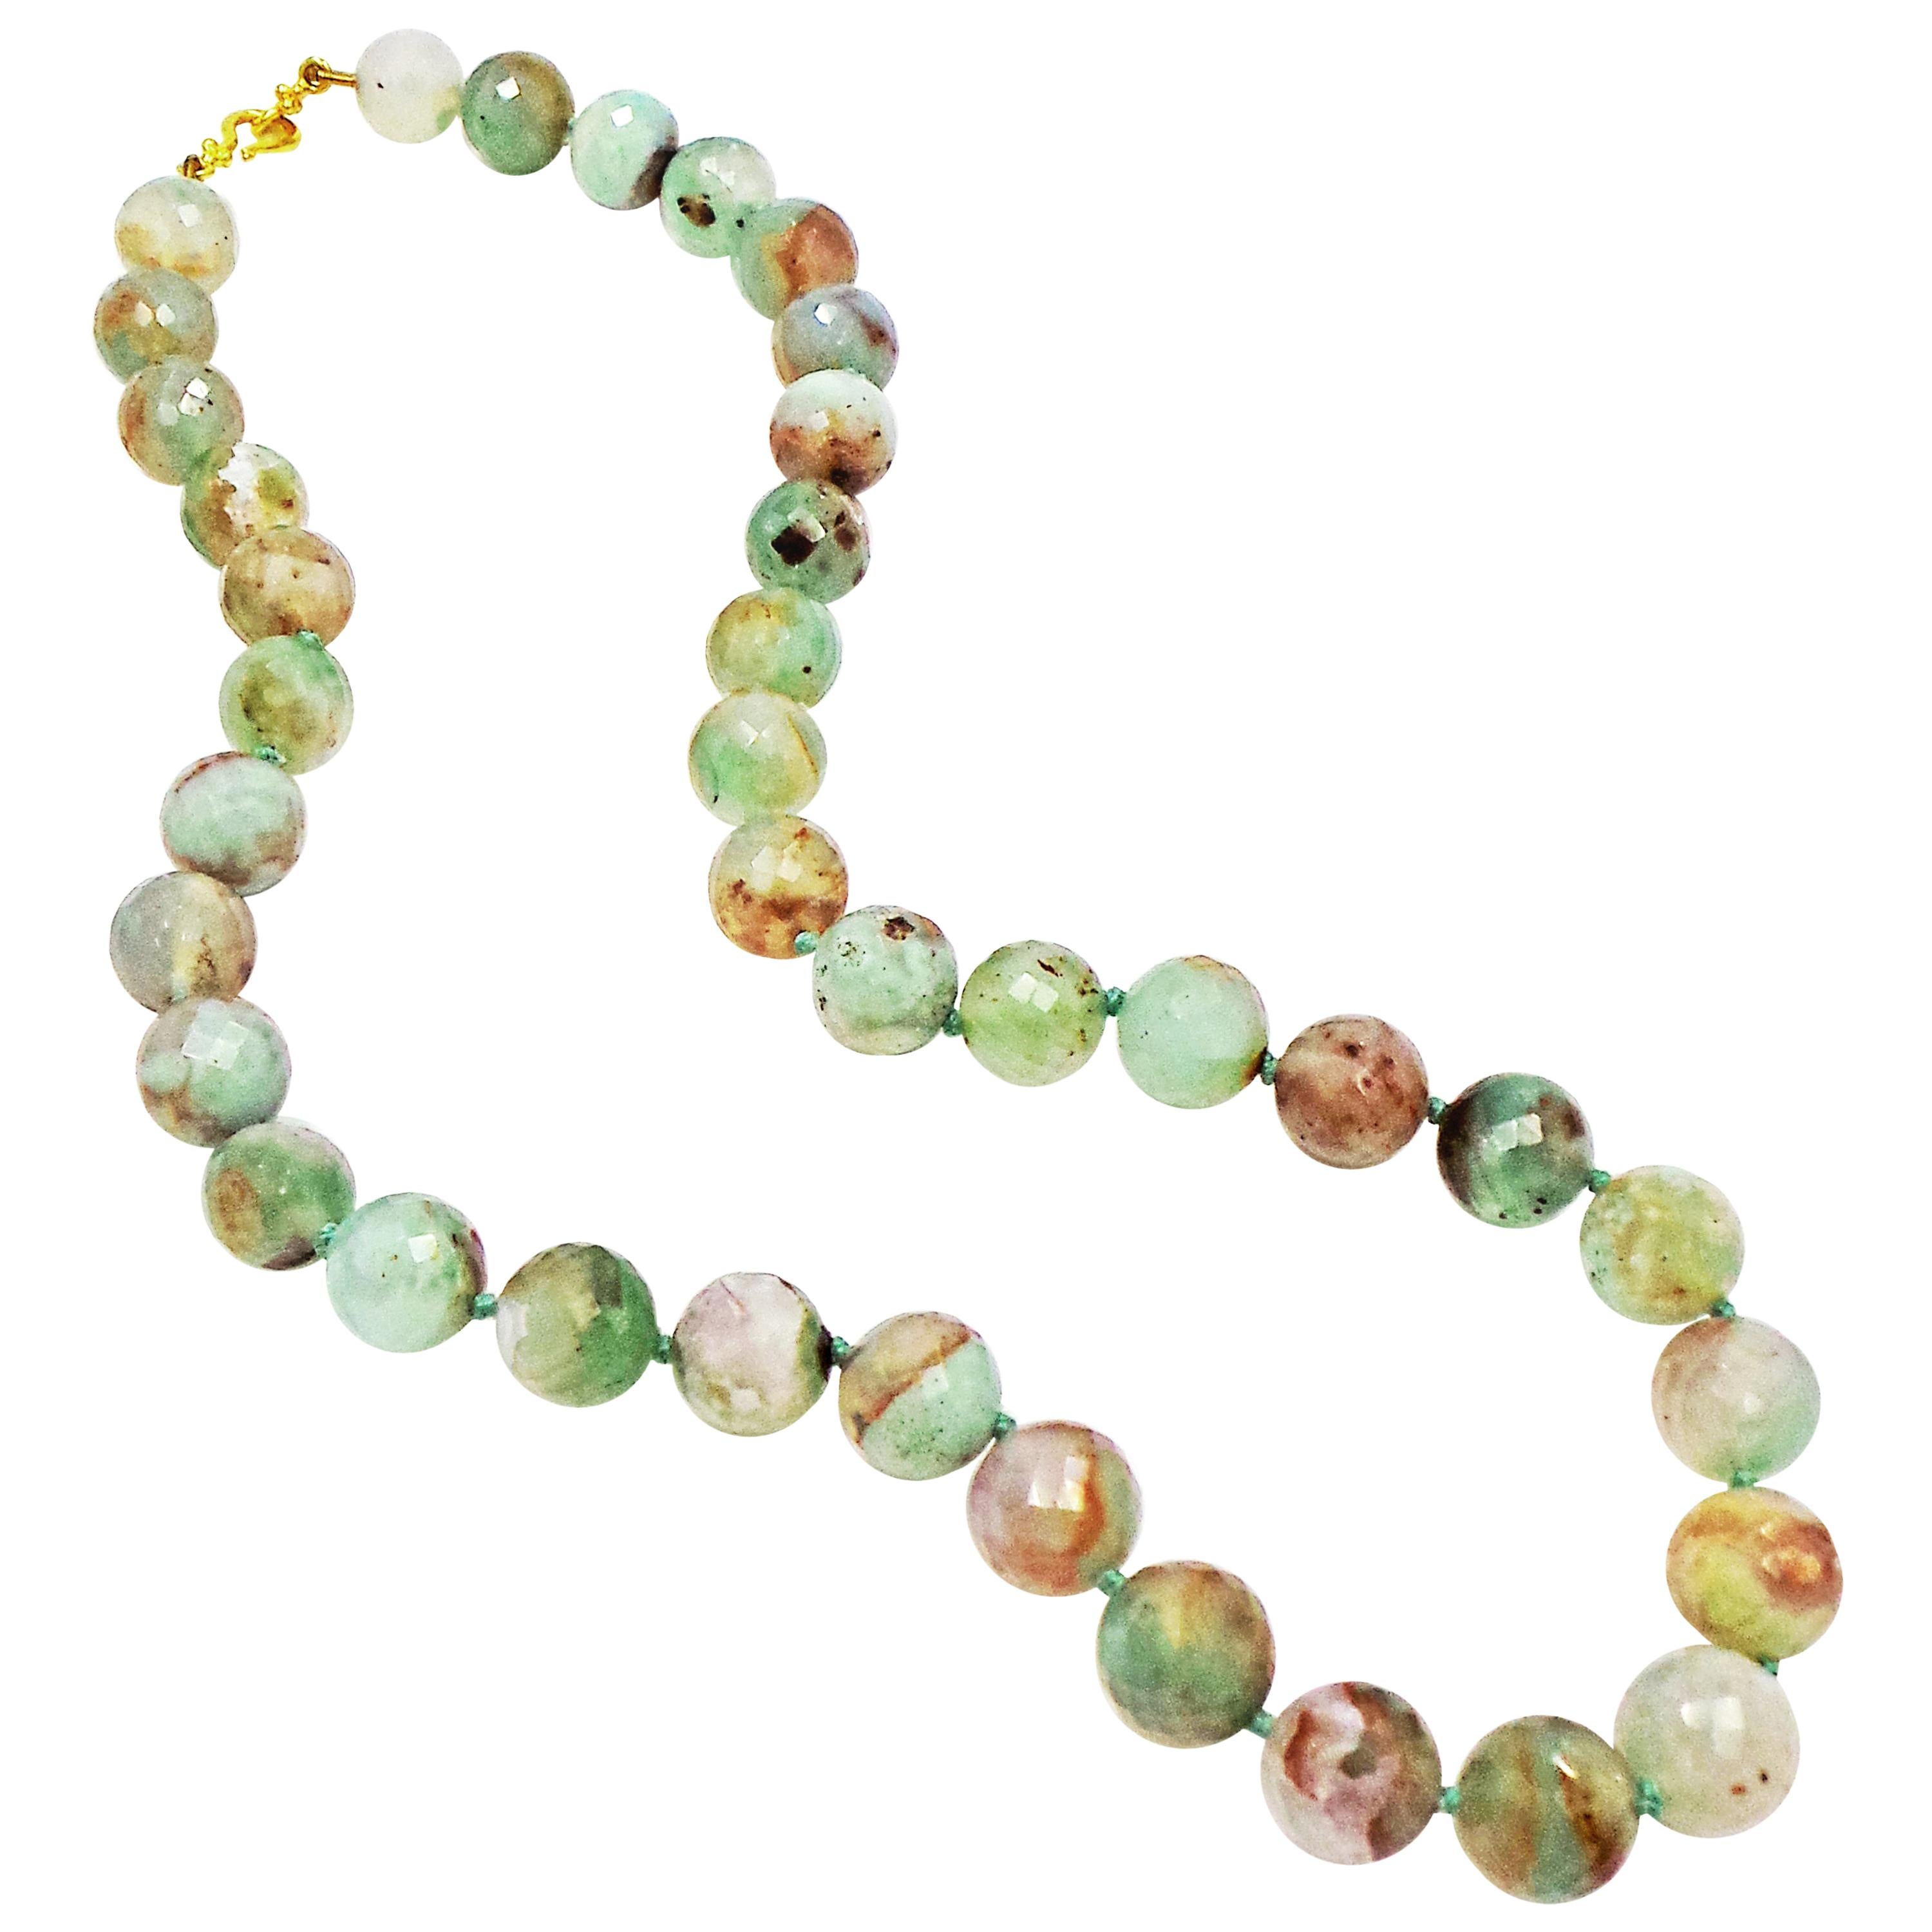 Faceted Aquaprase Beaded Necklace with 22 Karat Gold Toggle Clasp For Sale